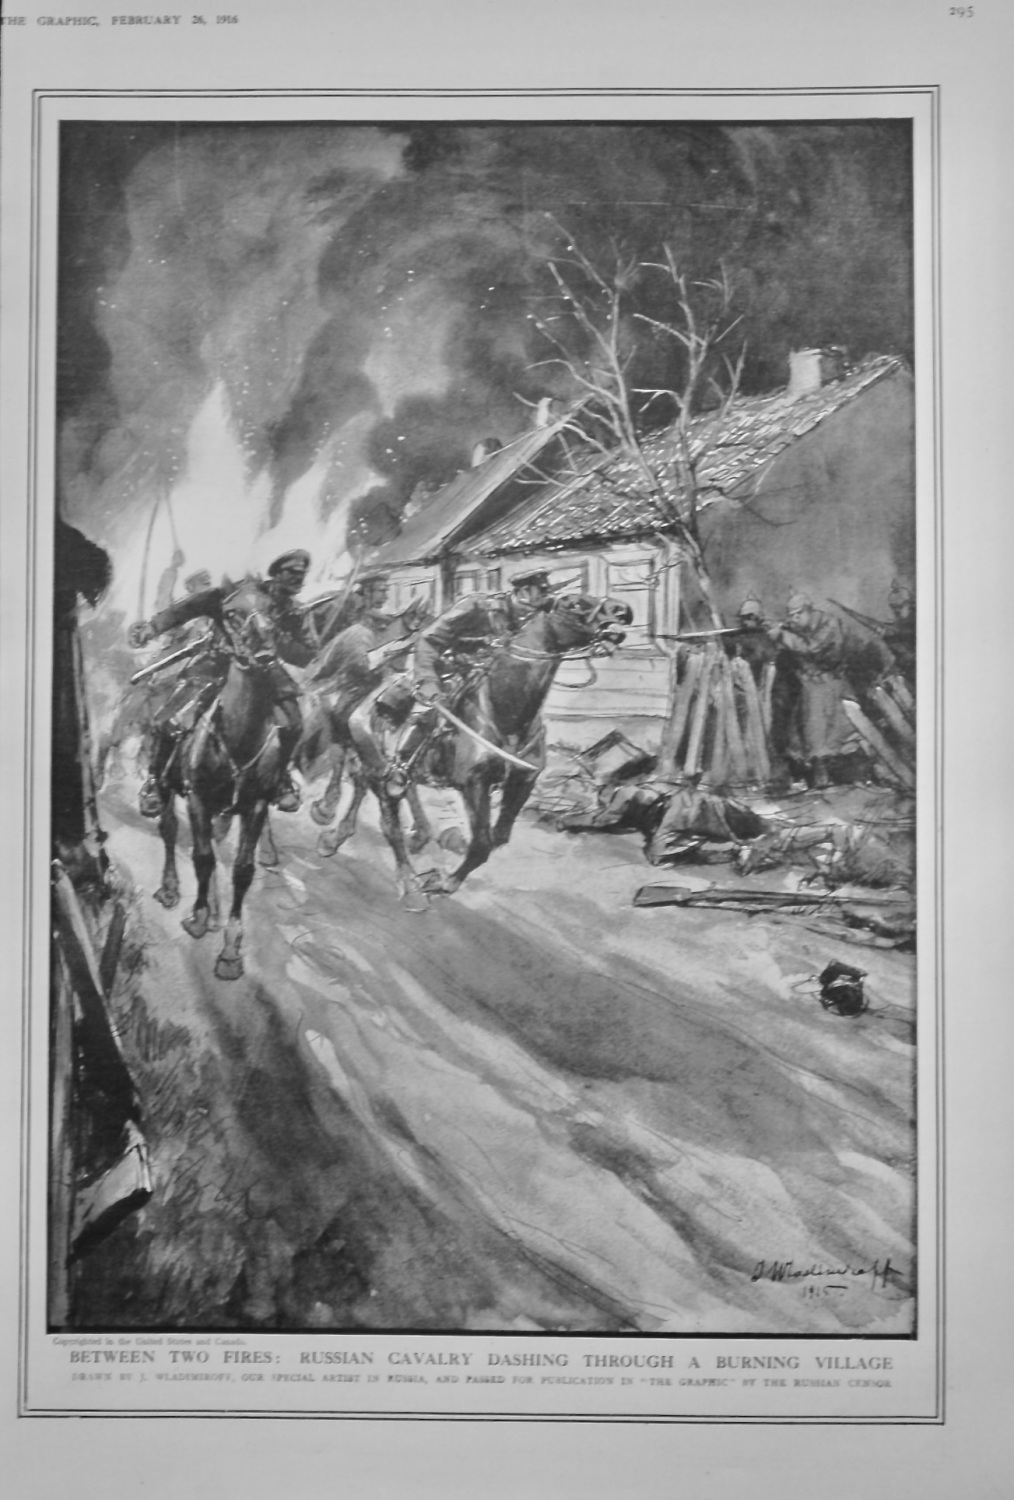 Between Two Fires :  Russian Cavalry dashing through a Burning Village.  19